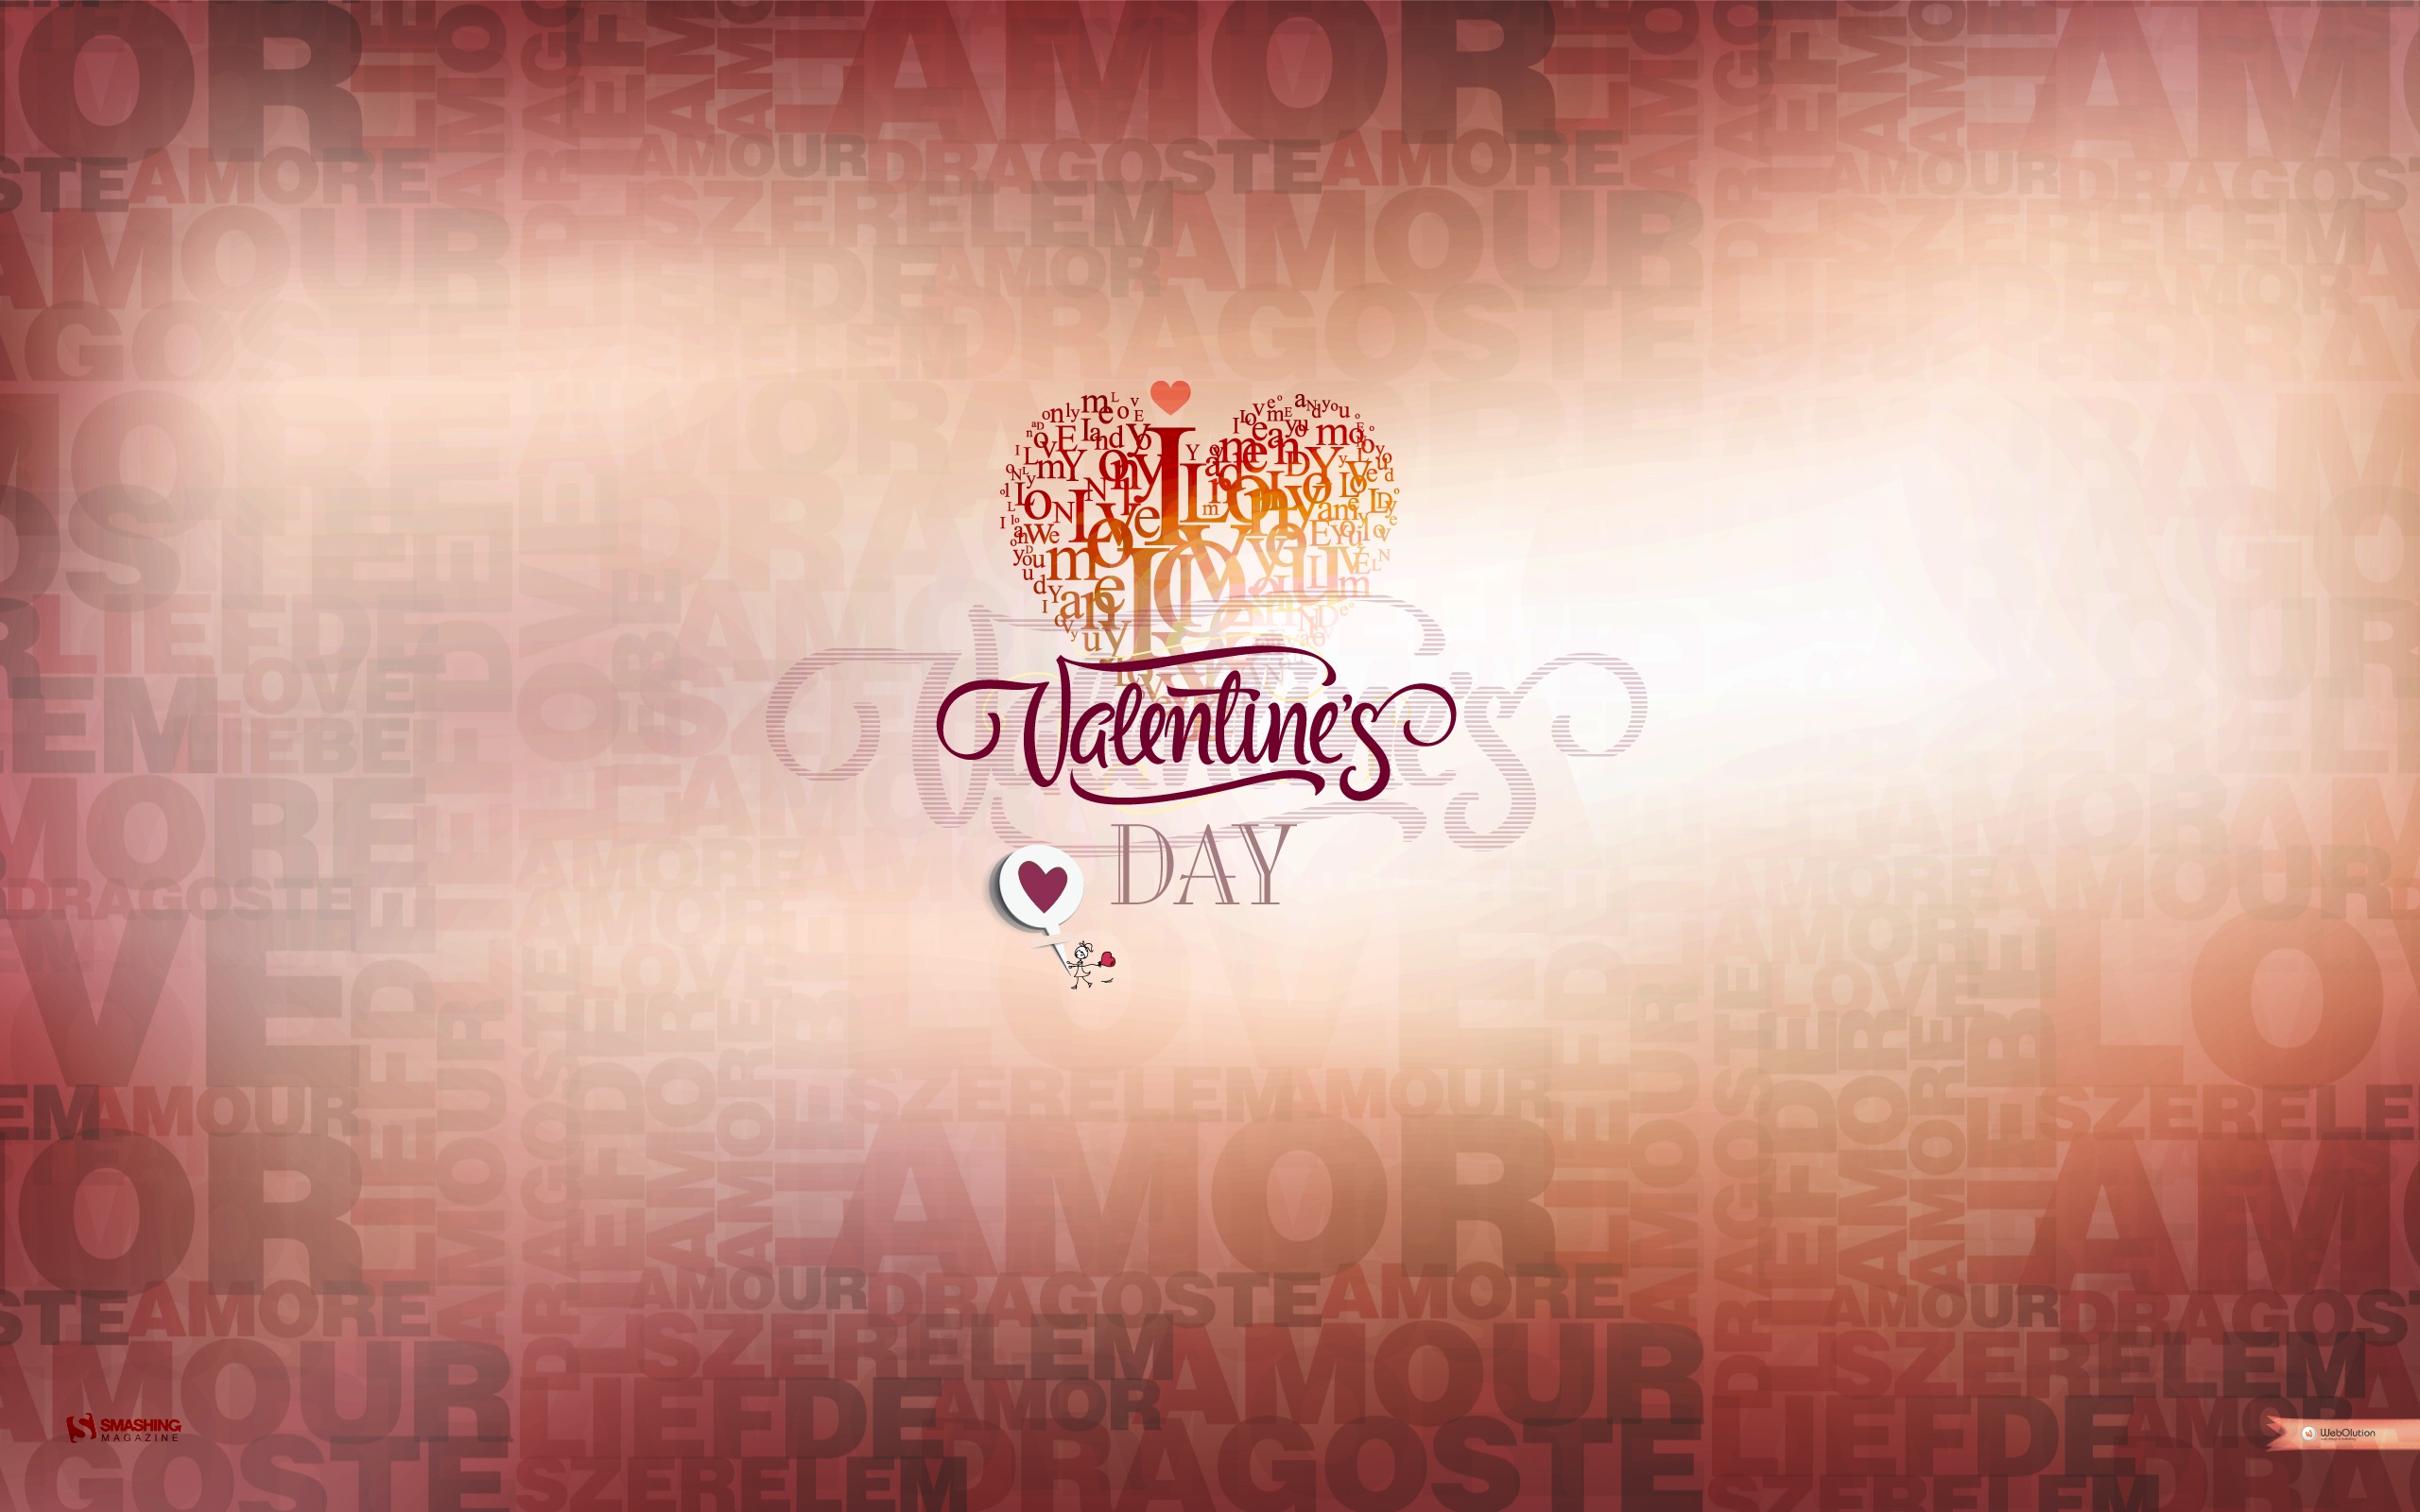 Feb 14 Valentines Day Wallpapers | HD Wallpapers